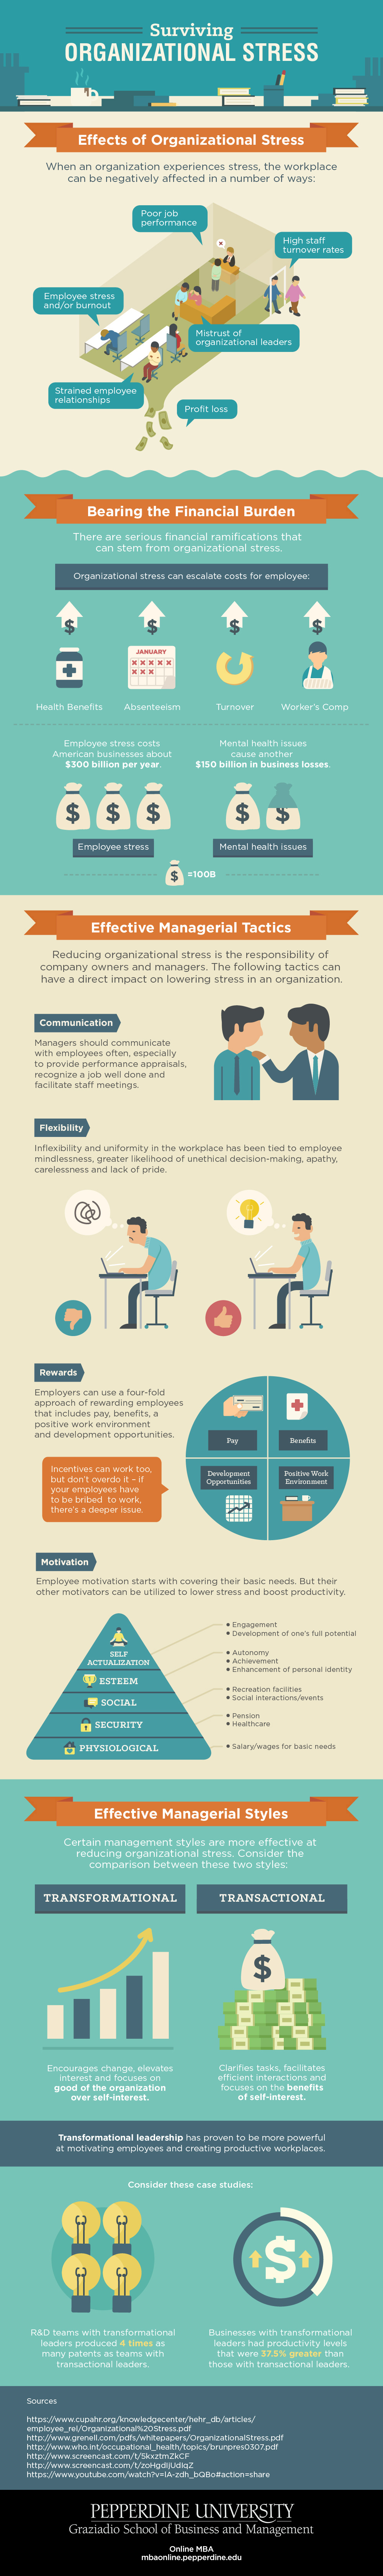 How To Survive Organizational Stress - Infographic